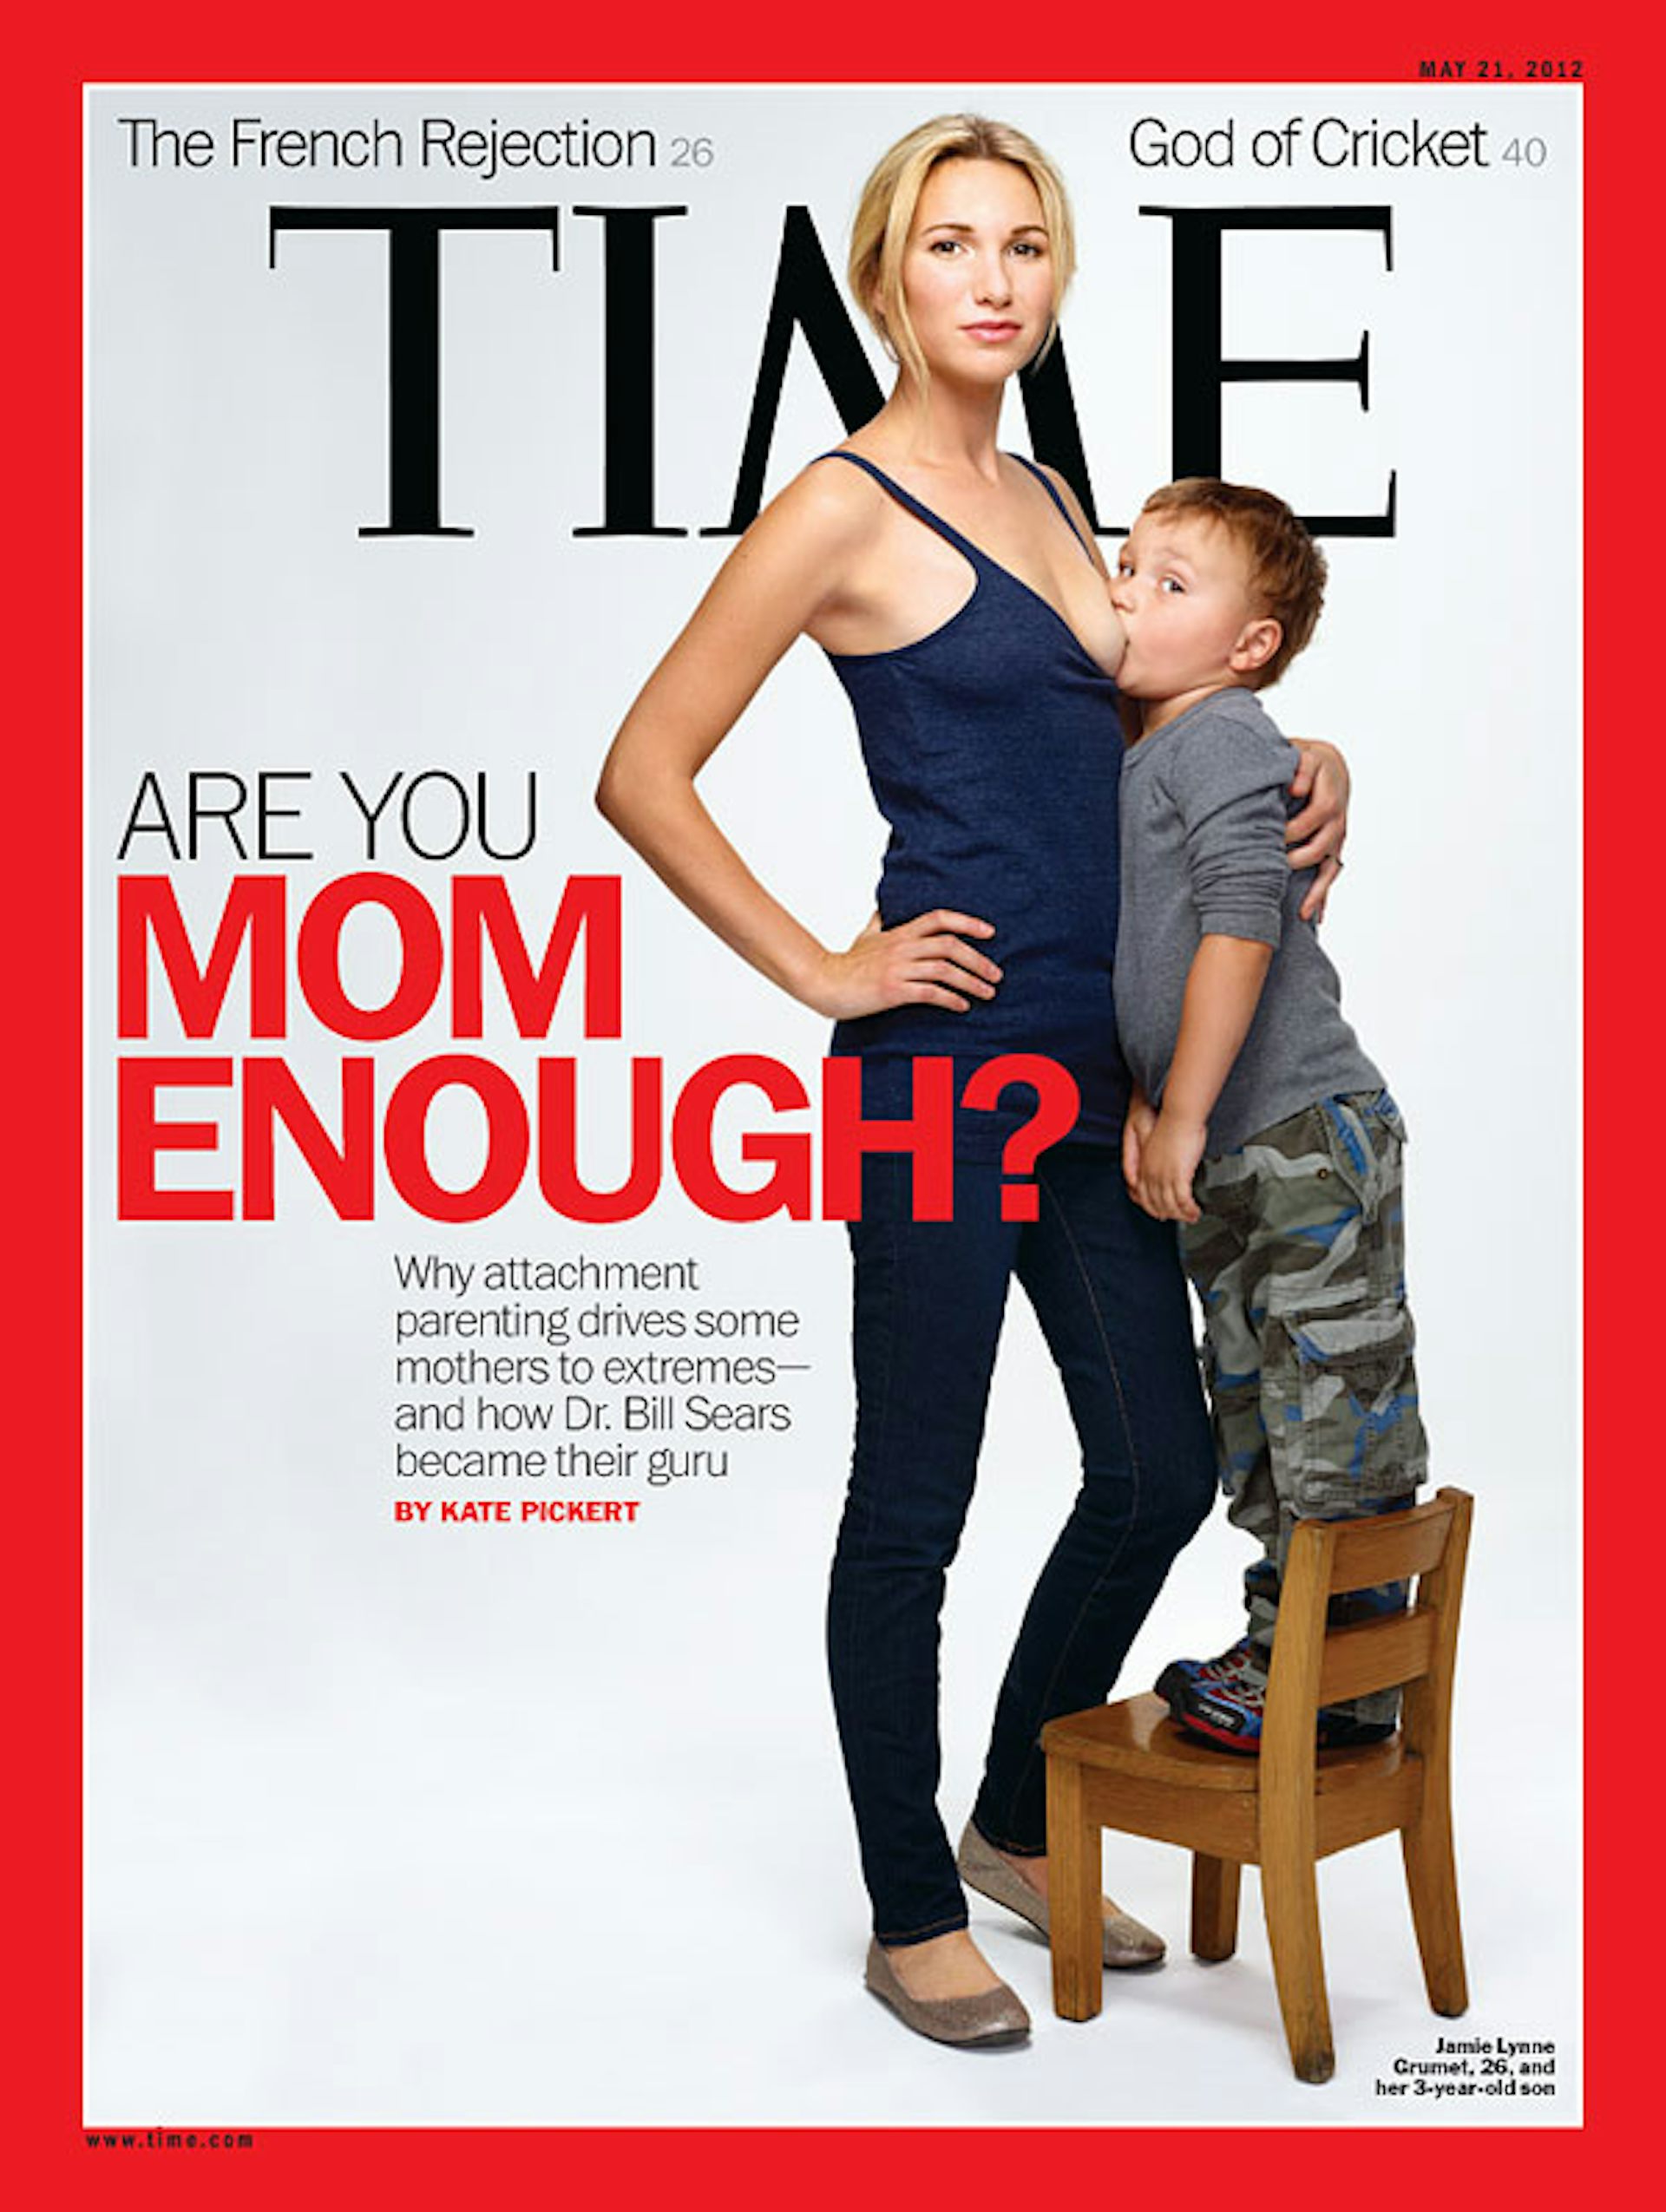 Time #2 extreme parenting, Time magazine style